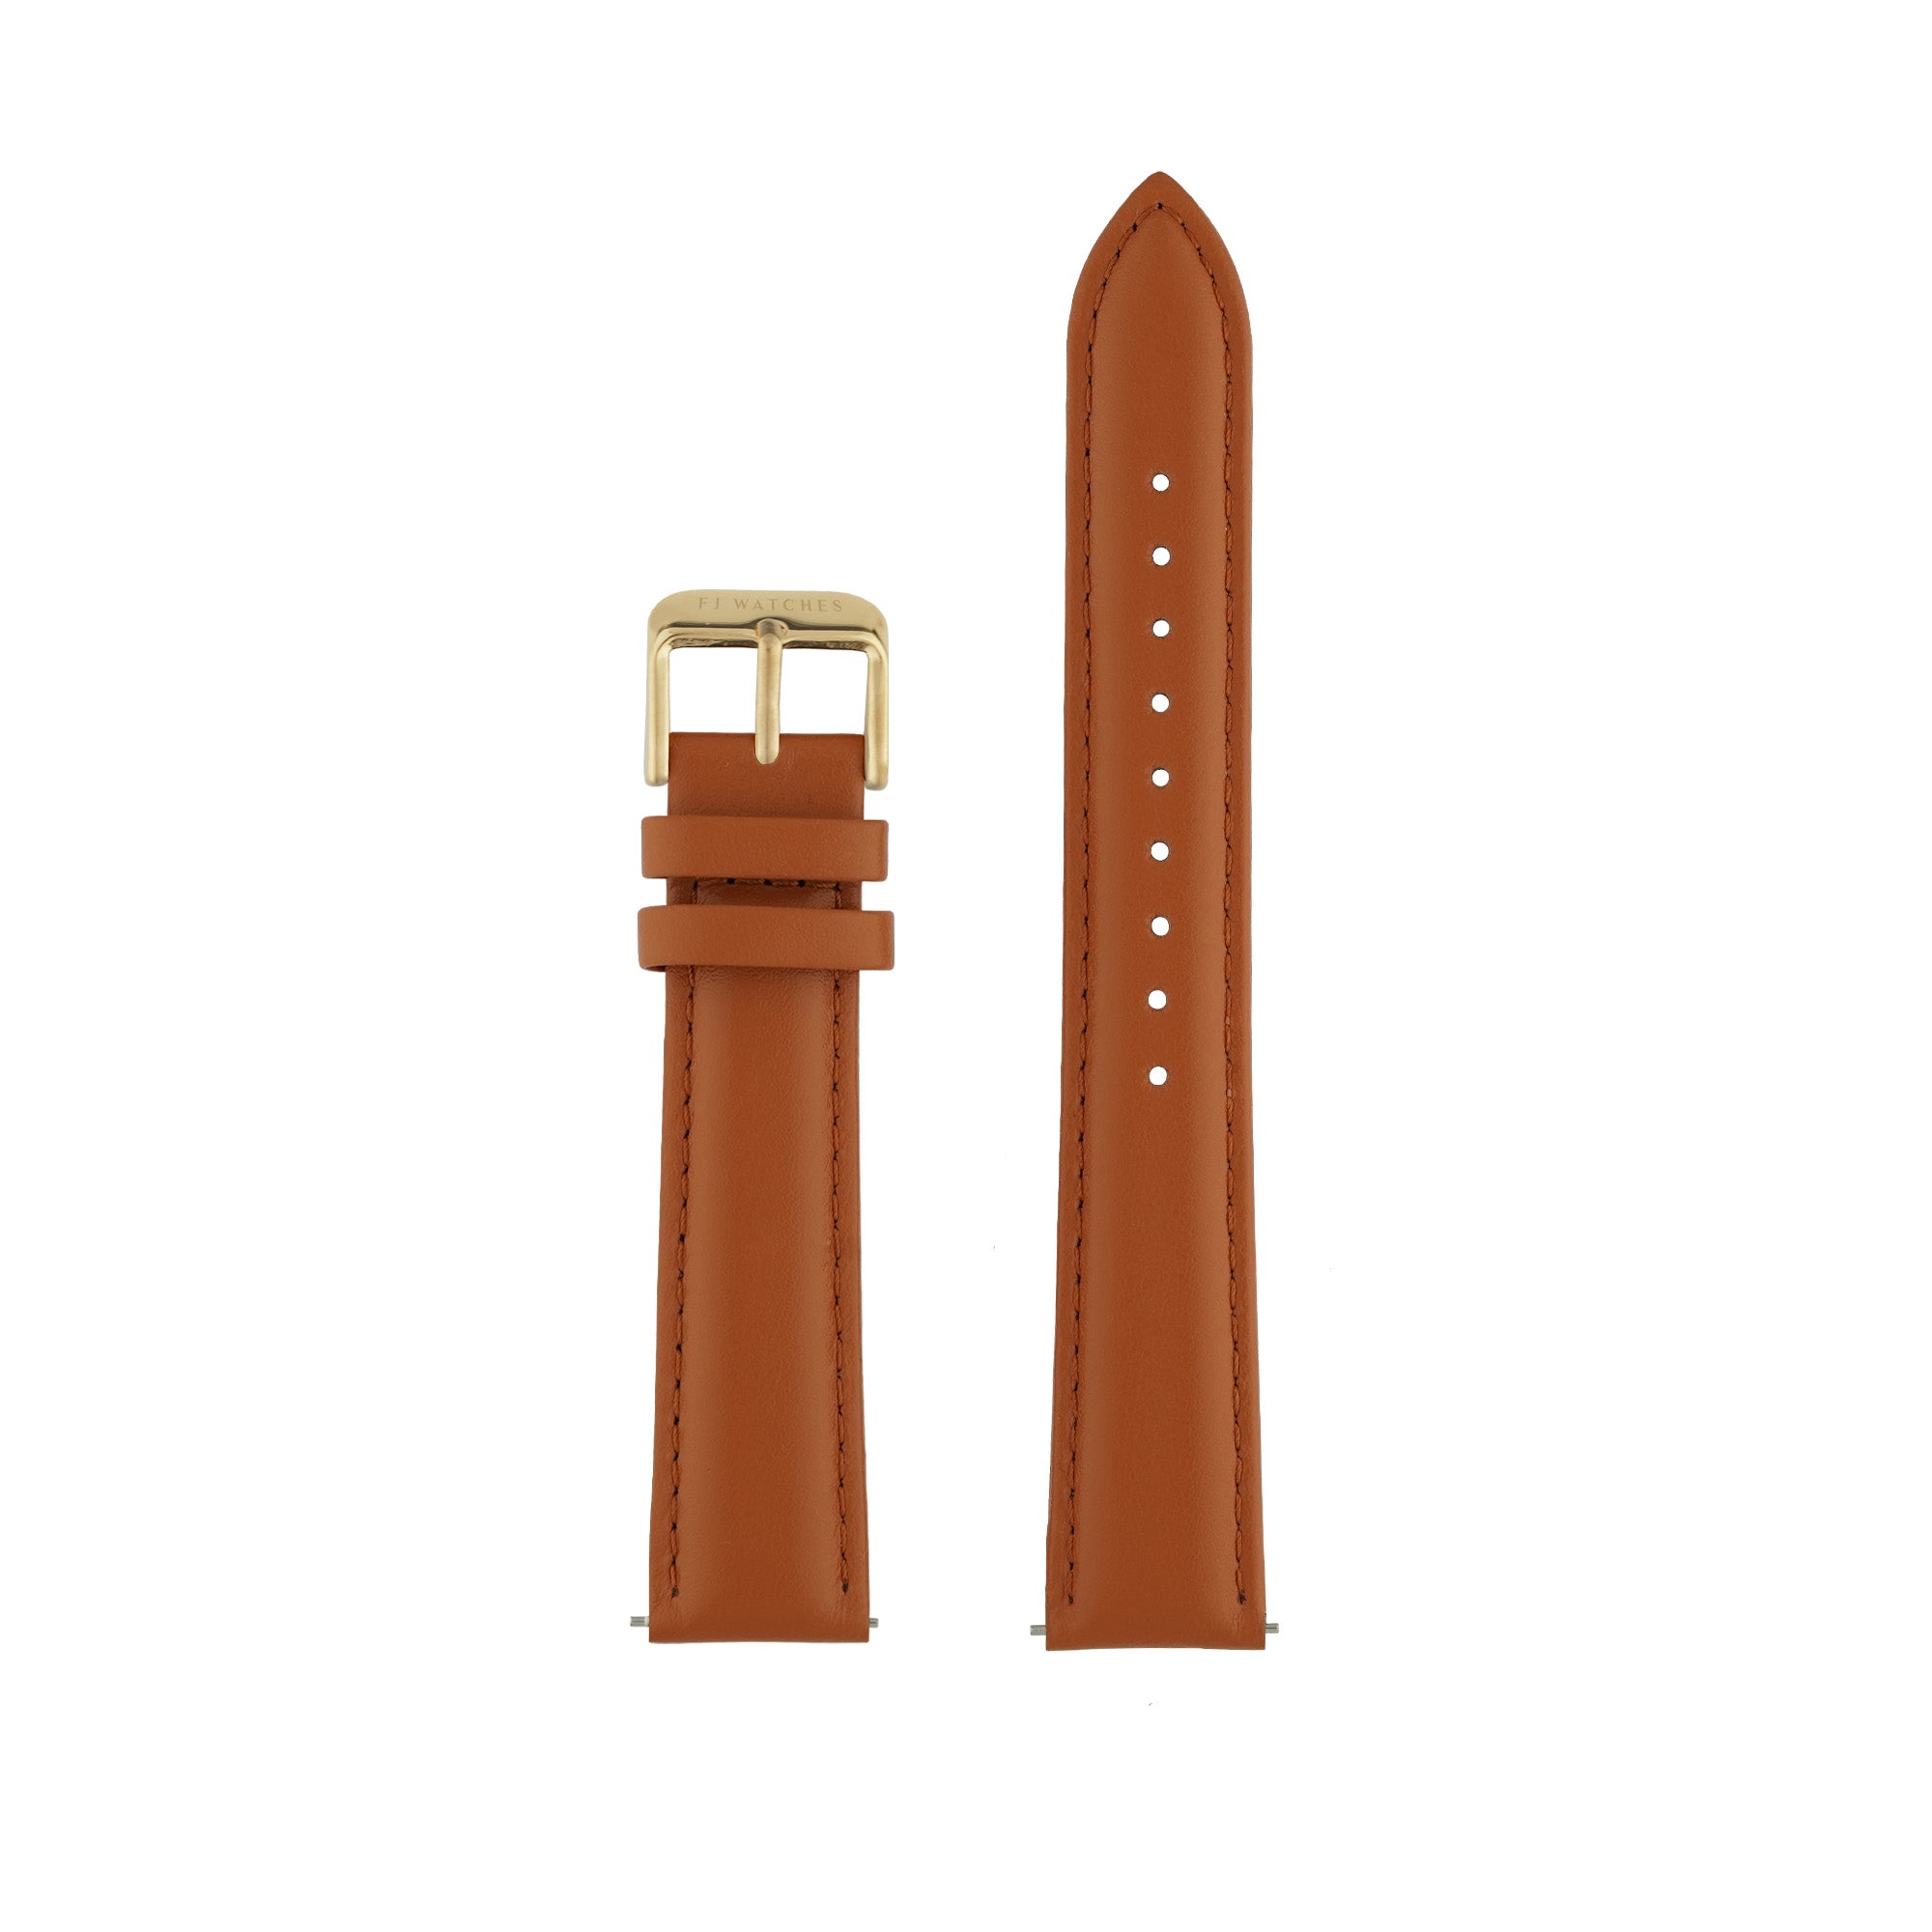 Tan band strap leather watch FJ Watches 18mm 20mm easy release gold